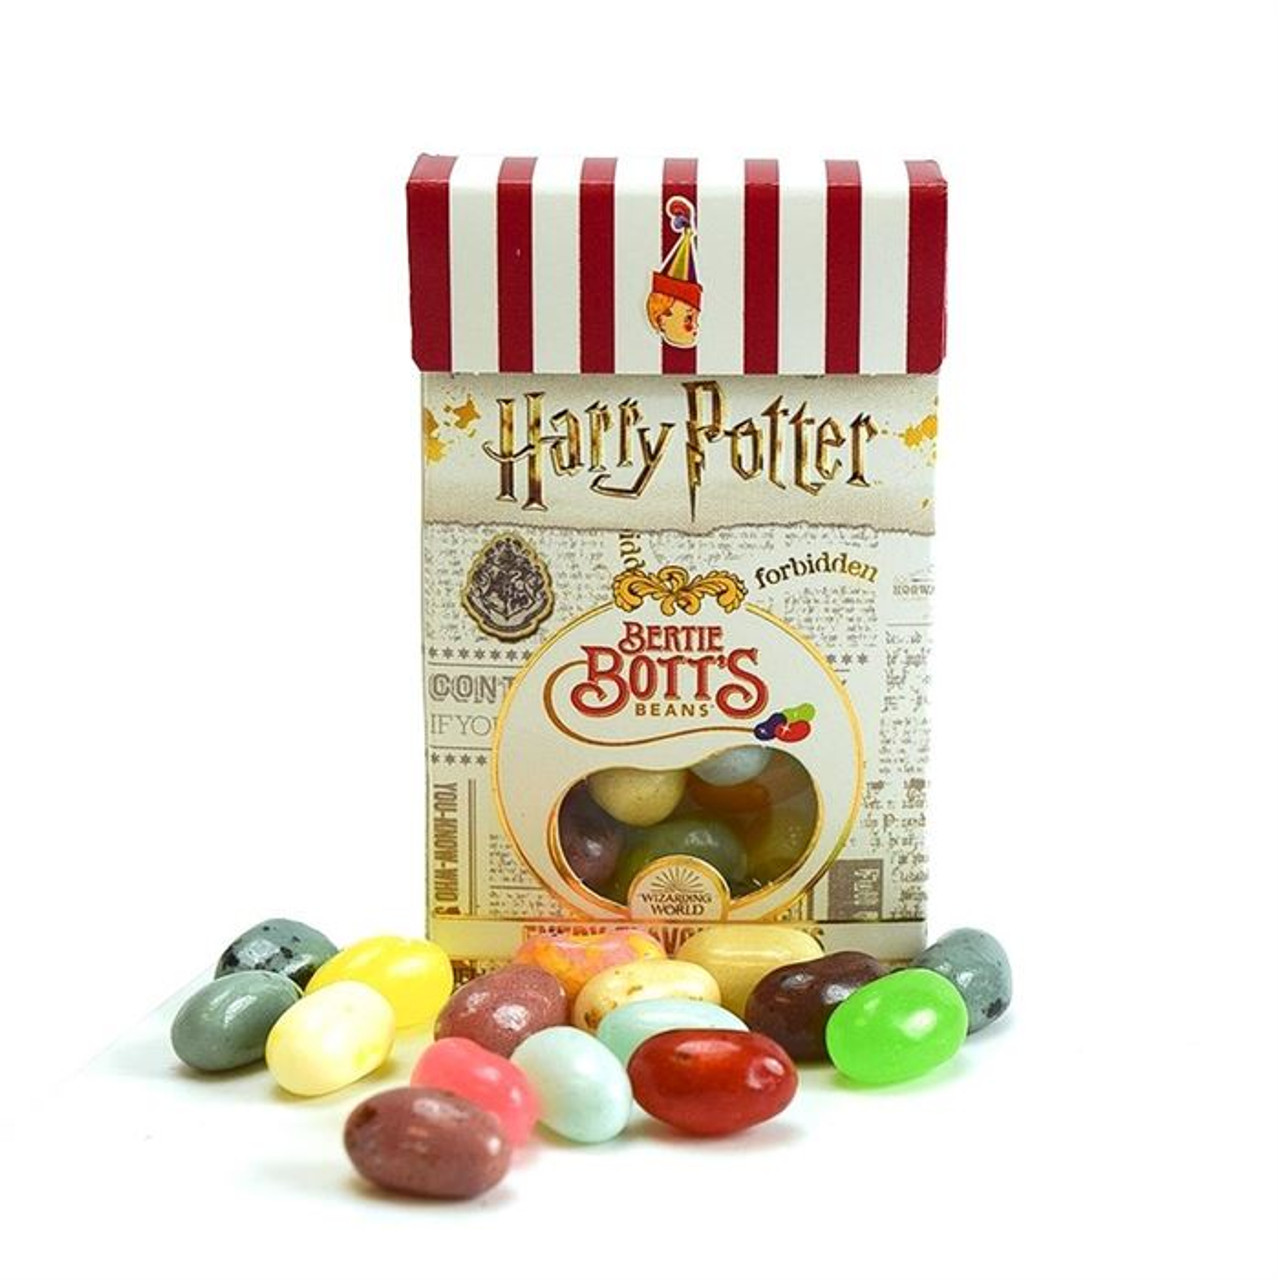 Jelly Belly Harry Potter Bertie Botts Every Flavor Beans 12 Oz Box 